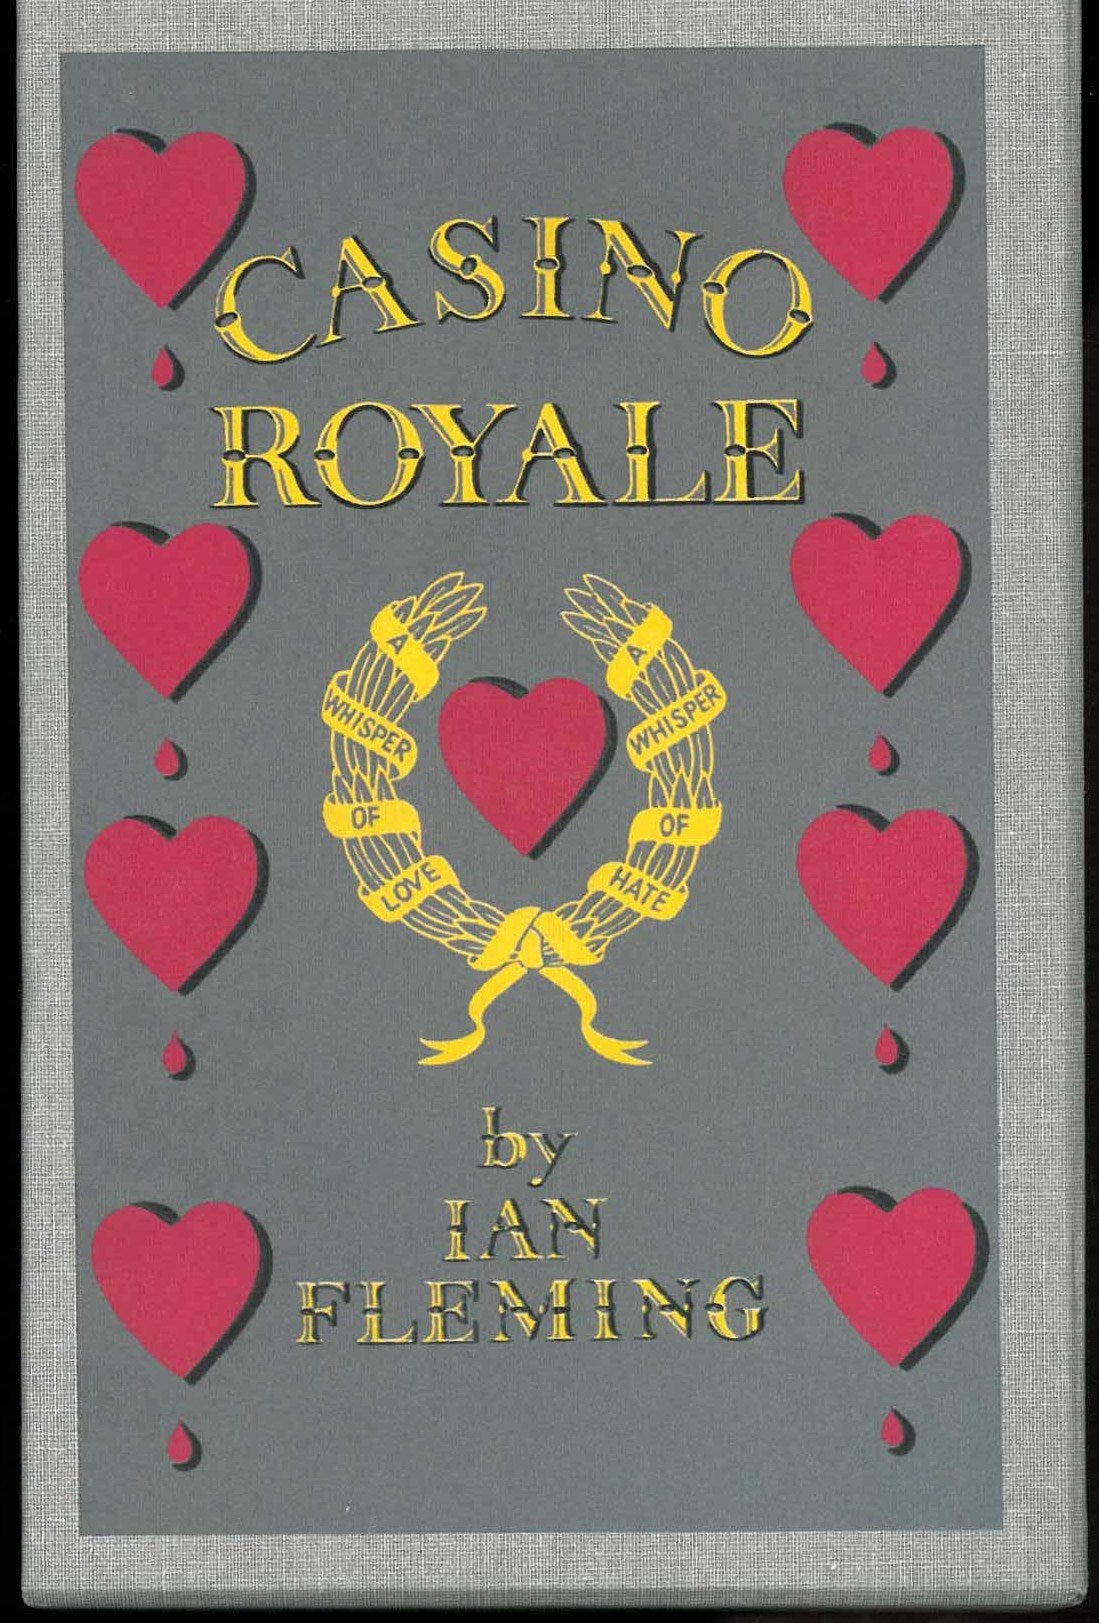 This is the complete set of 14 James Bond books written by Ian Fleming, these are exact facsimile copies of the published first editions. Each comes with its own slip case (there is a small repair to the Casino Royale box), and they look as if they